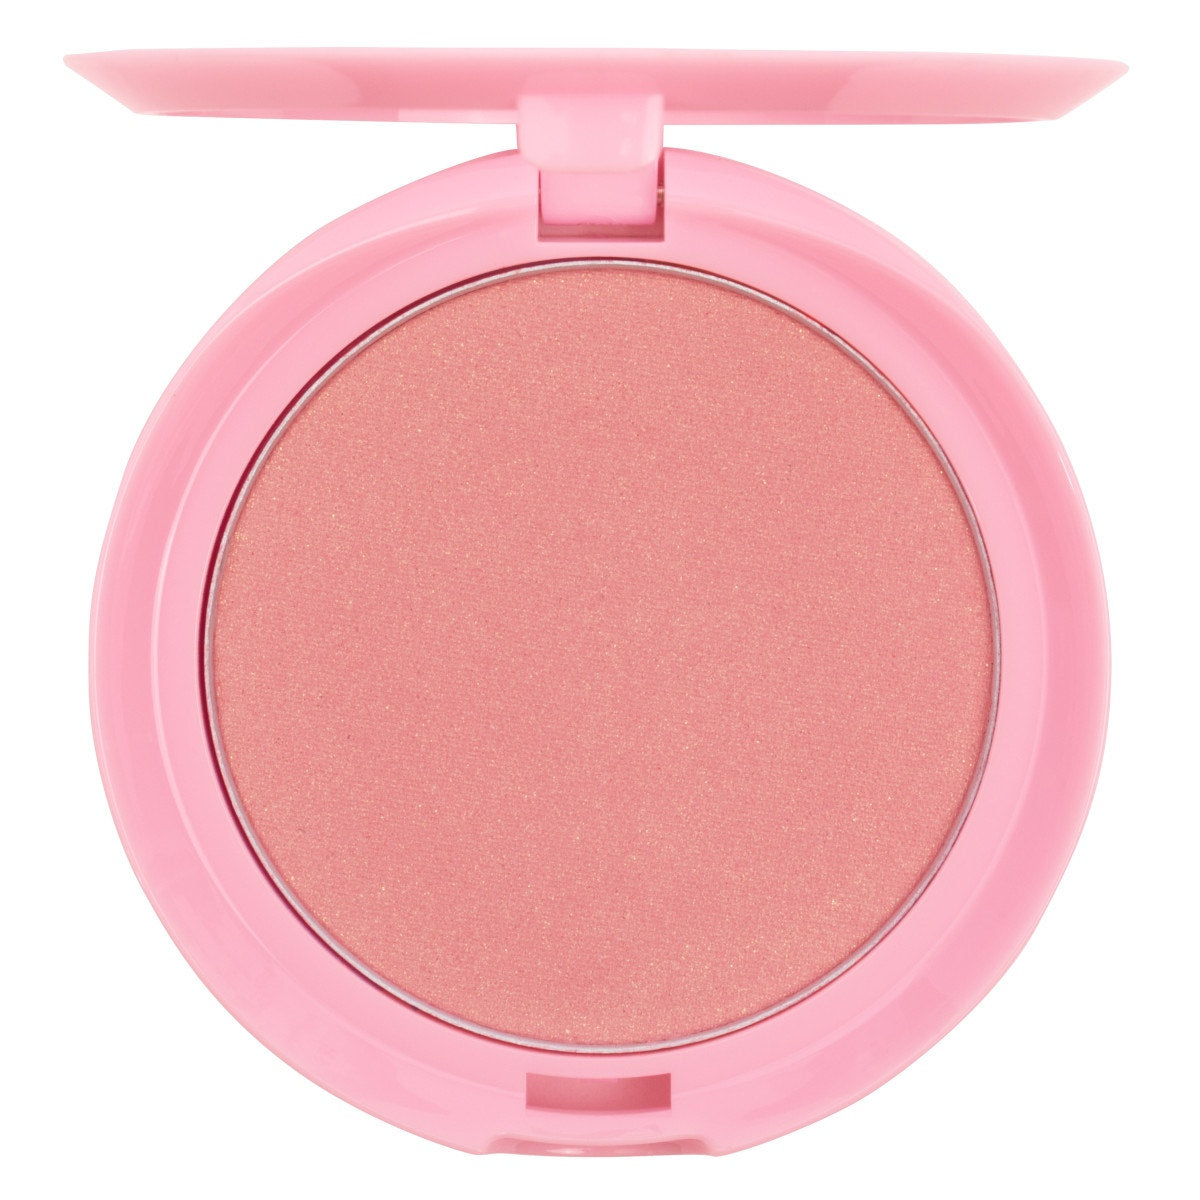 Wet n Wild - Valentine's Color Icon Blush- Pearlescent Pink